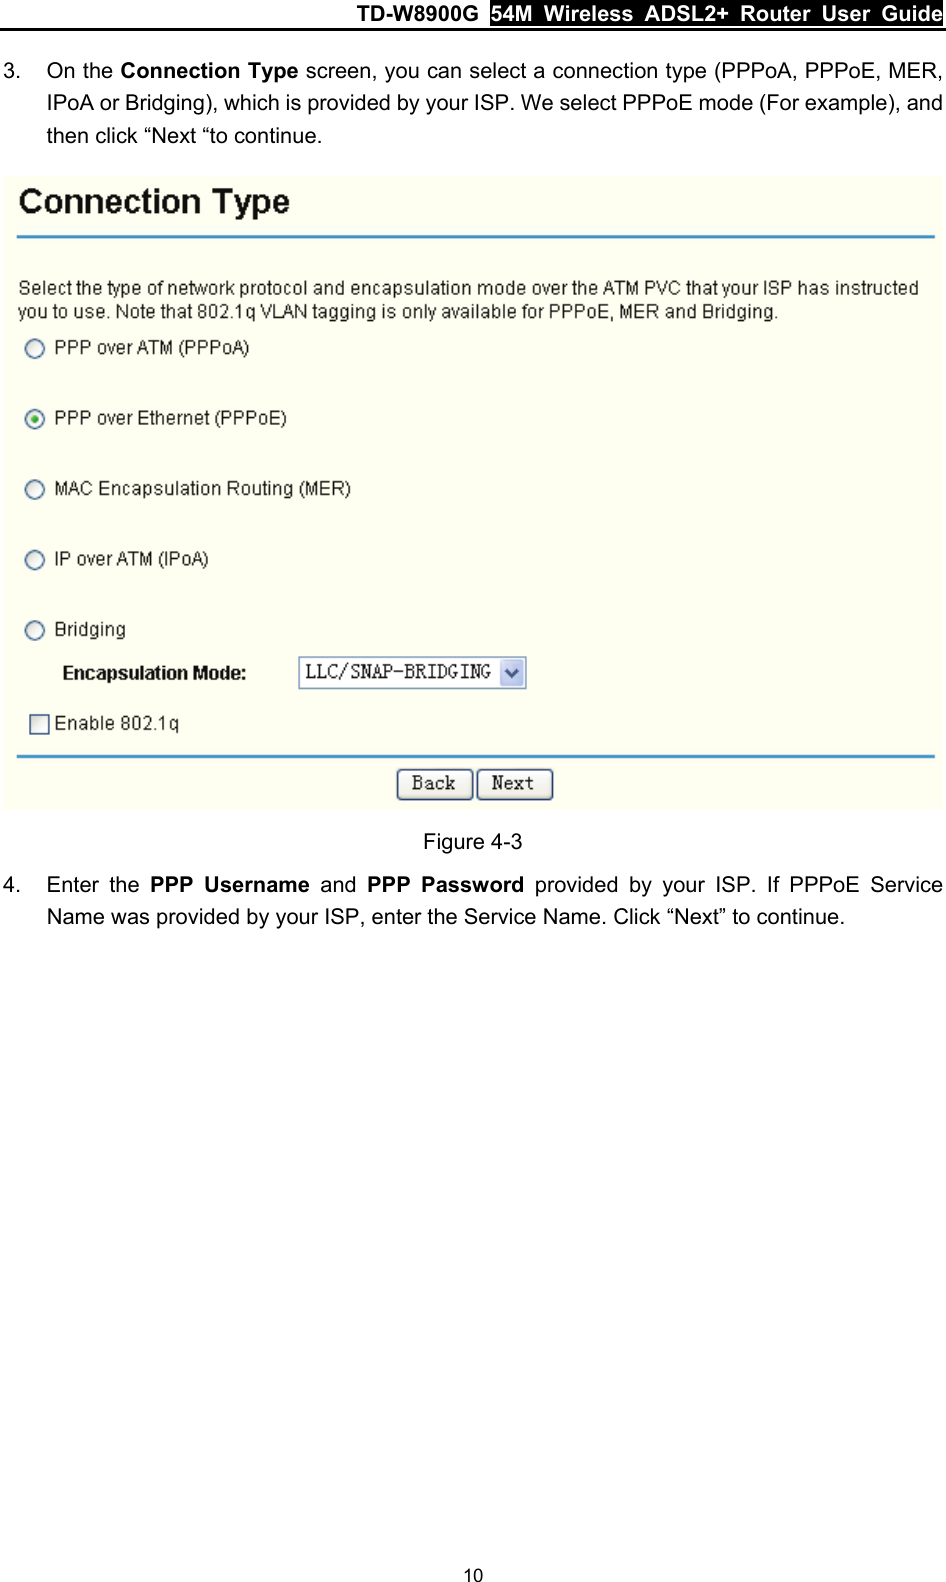 TD-W8900G  54M Wireless ADSL2+ Router User Guide 10 3. On the Connection Type screen, you can select a connection type (PPPoA, PPPoE, MER, IPoA or Bridging), which is provided by your ISP. We select PPPoE mode (For example), and then click “Next “to continue.  Figure 4-3 4. Enter the PPP Username and PPP Password provided by your ISP. If PPPoE Service Name was provided by your ISP, enter the Service Name. Click “Next” to continue. 